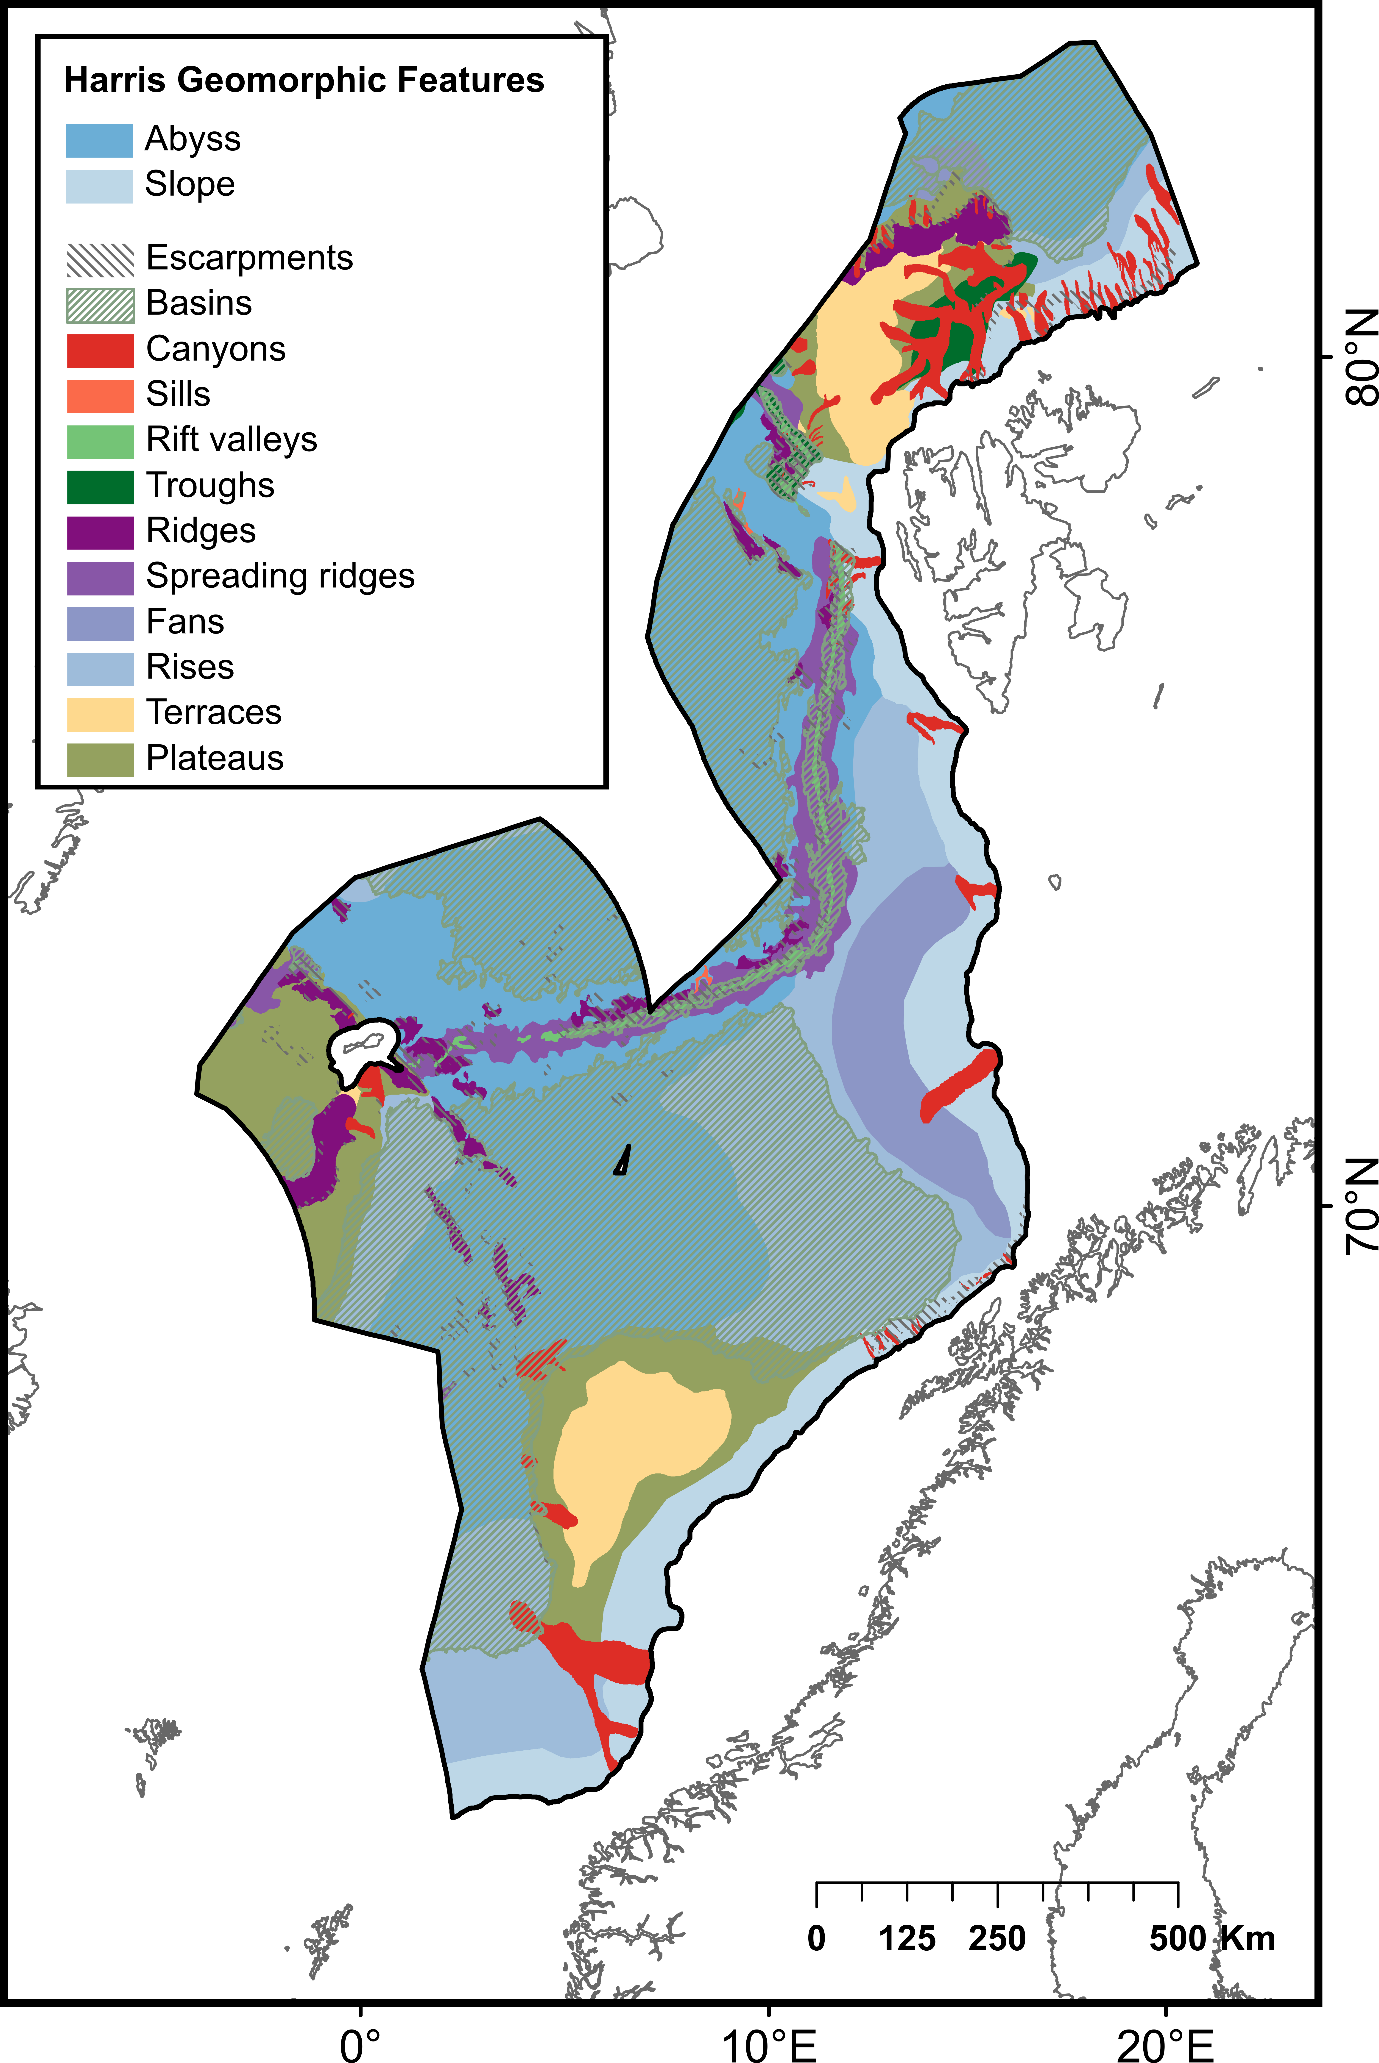 Colors represent the following geomorphic features (from top to bottom): Abyss, Slope, Escarpments, Basins, Canyons, Sills, Rift valleys, Troughs, Ridges, Spreading ridges, Fans, Rises, Terraces and Plateaus